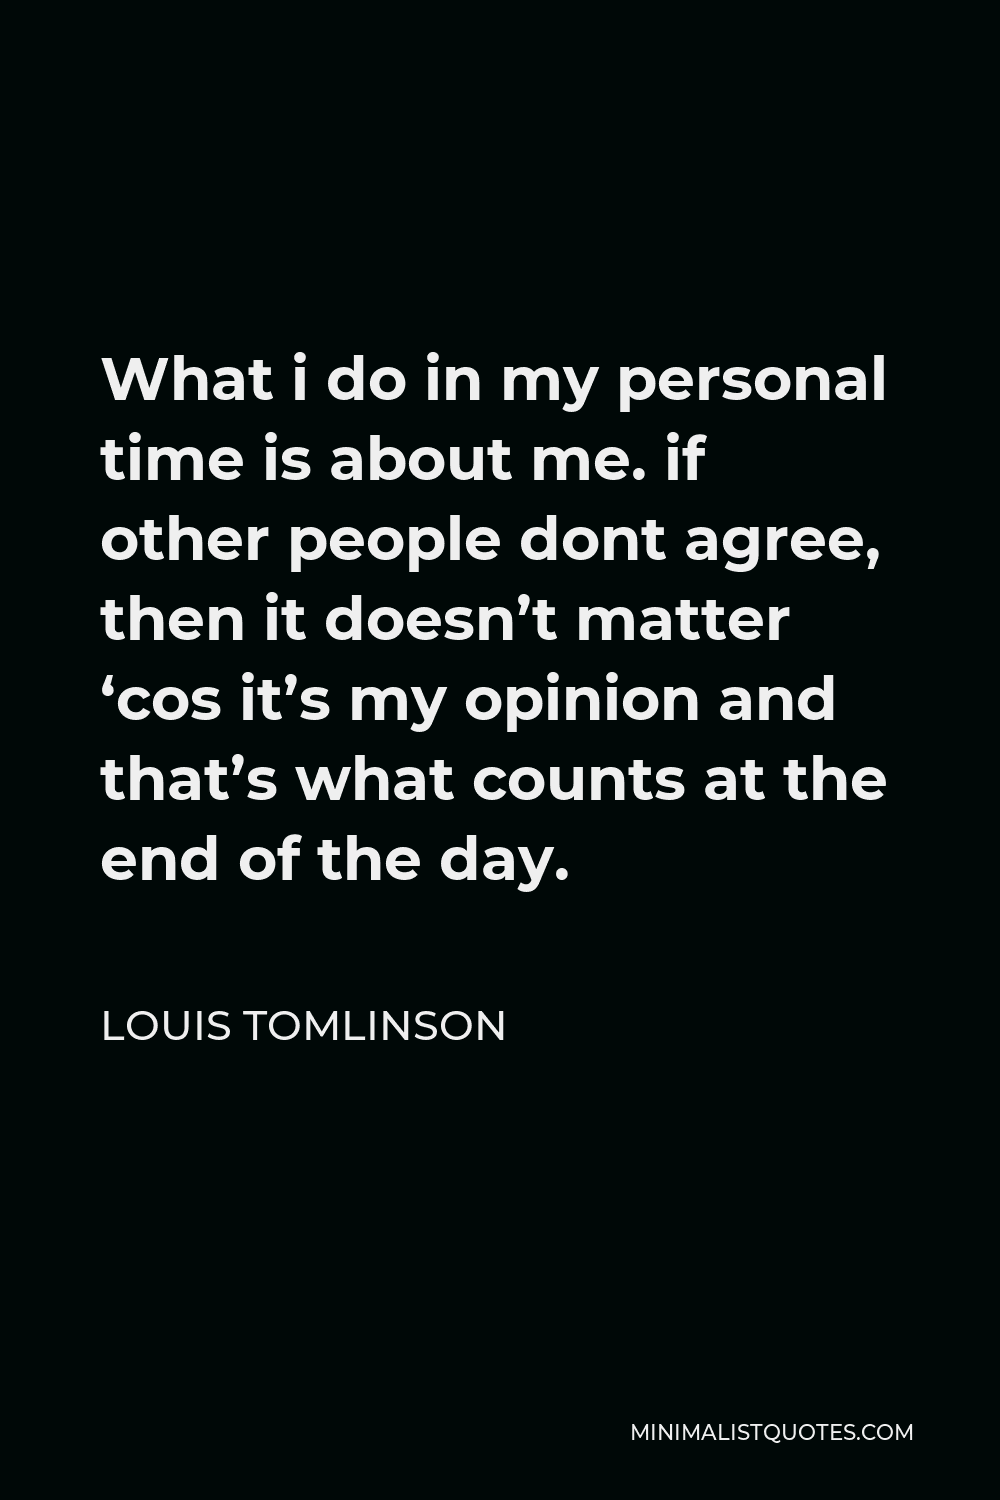 Louis Tomlinson Quote - What i do in my personal time is about me. if other people dont agree, then it doesn’t matter ‘cos it’s my opinion and that’s what counts at the end of the day.